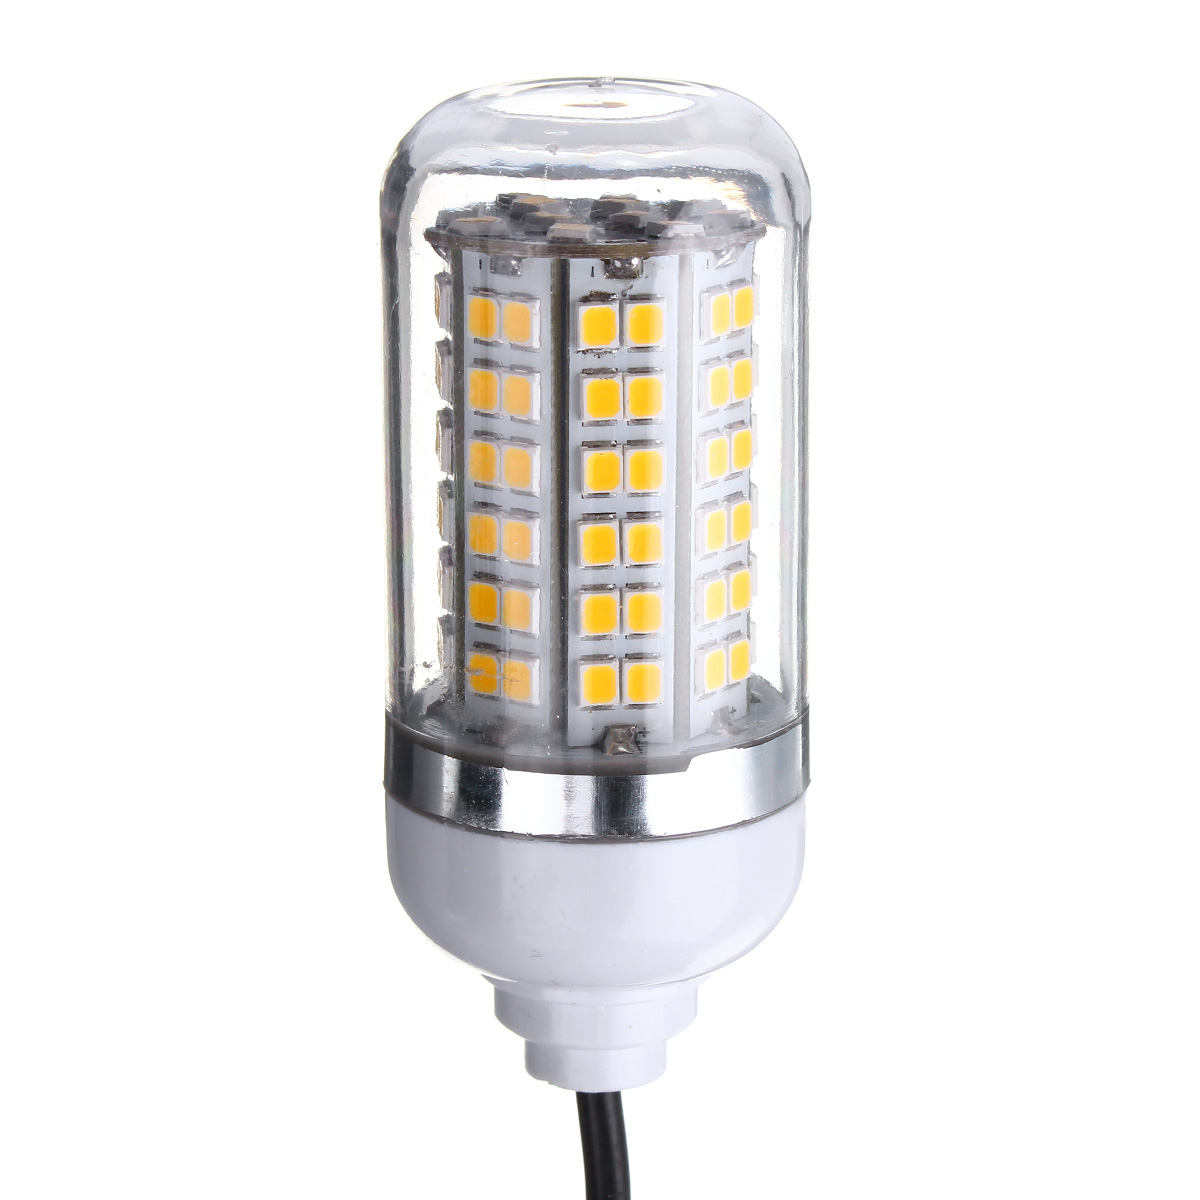 DC12V-7W-SMD2835-108-Underwater-LED-Fishing-Night-Boat-Attracts-Fish-Squid-Light-Bulb-with-Switch-1276984-4